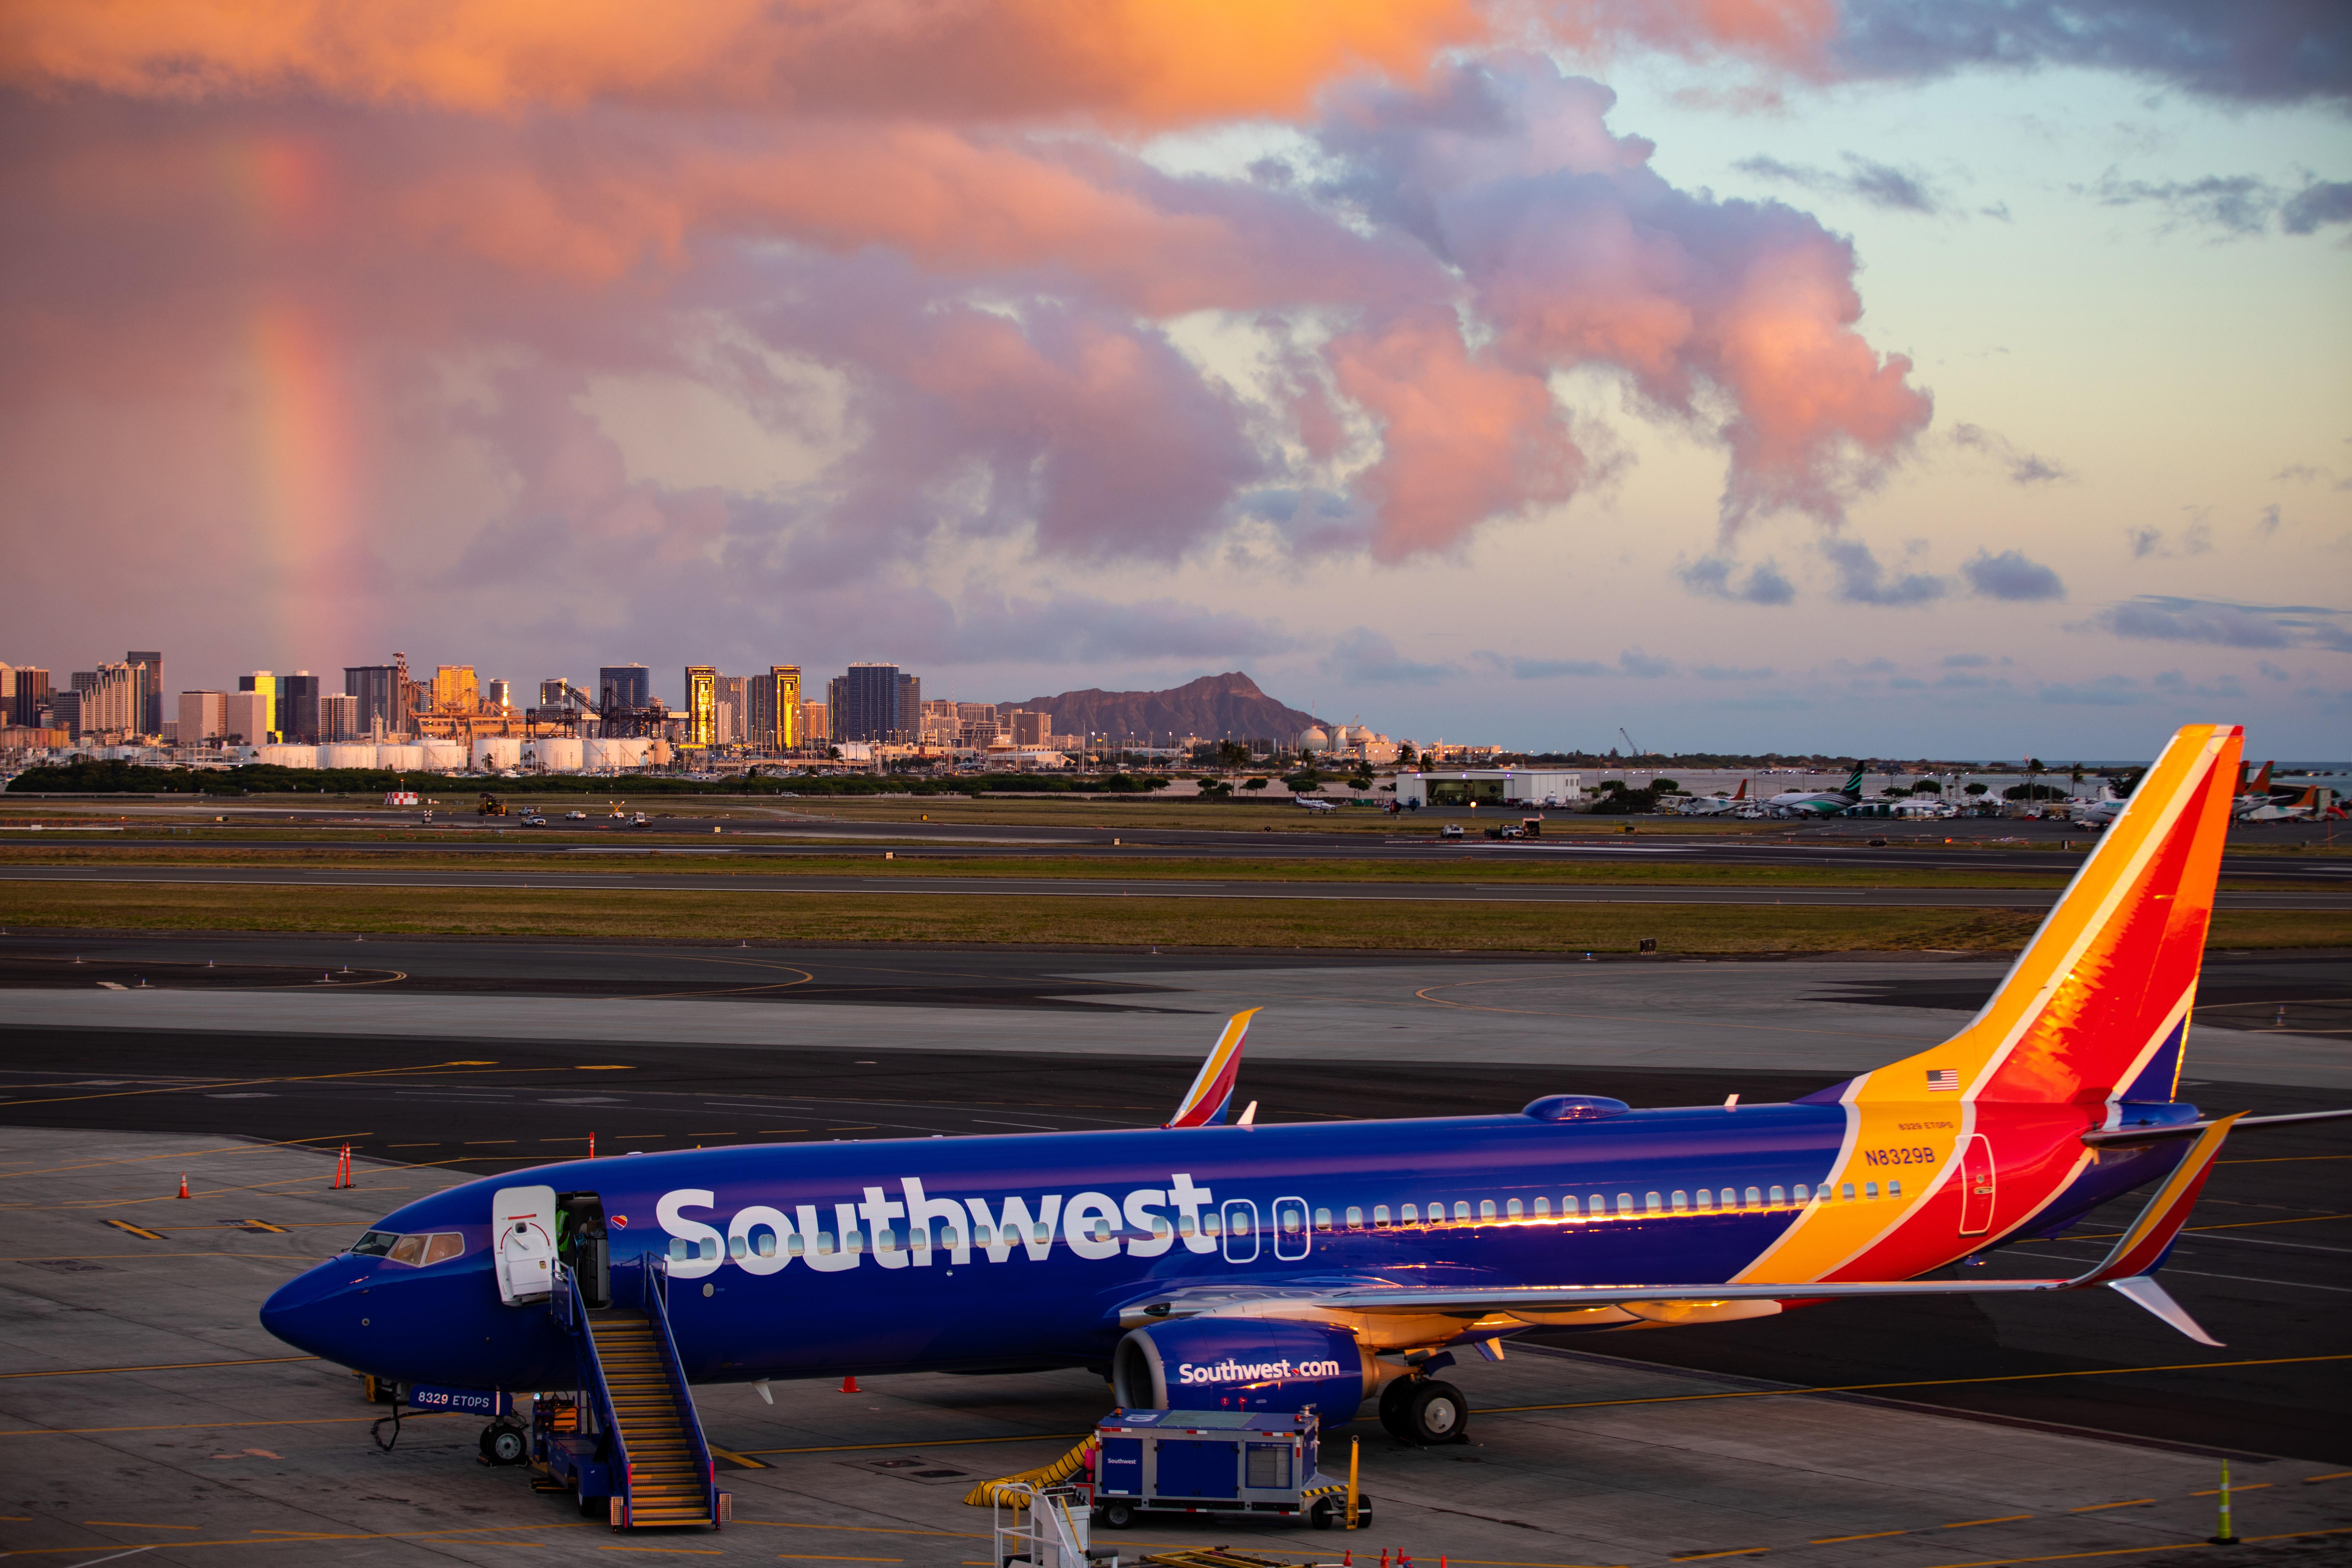 Southwest Airlines first flight to Hawaii